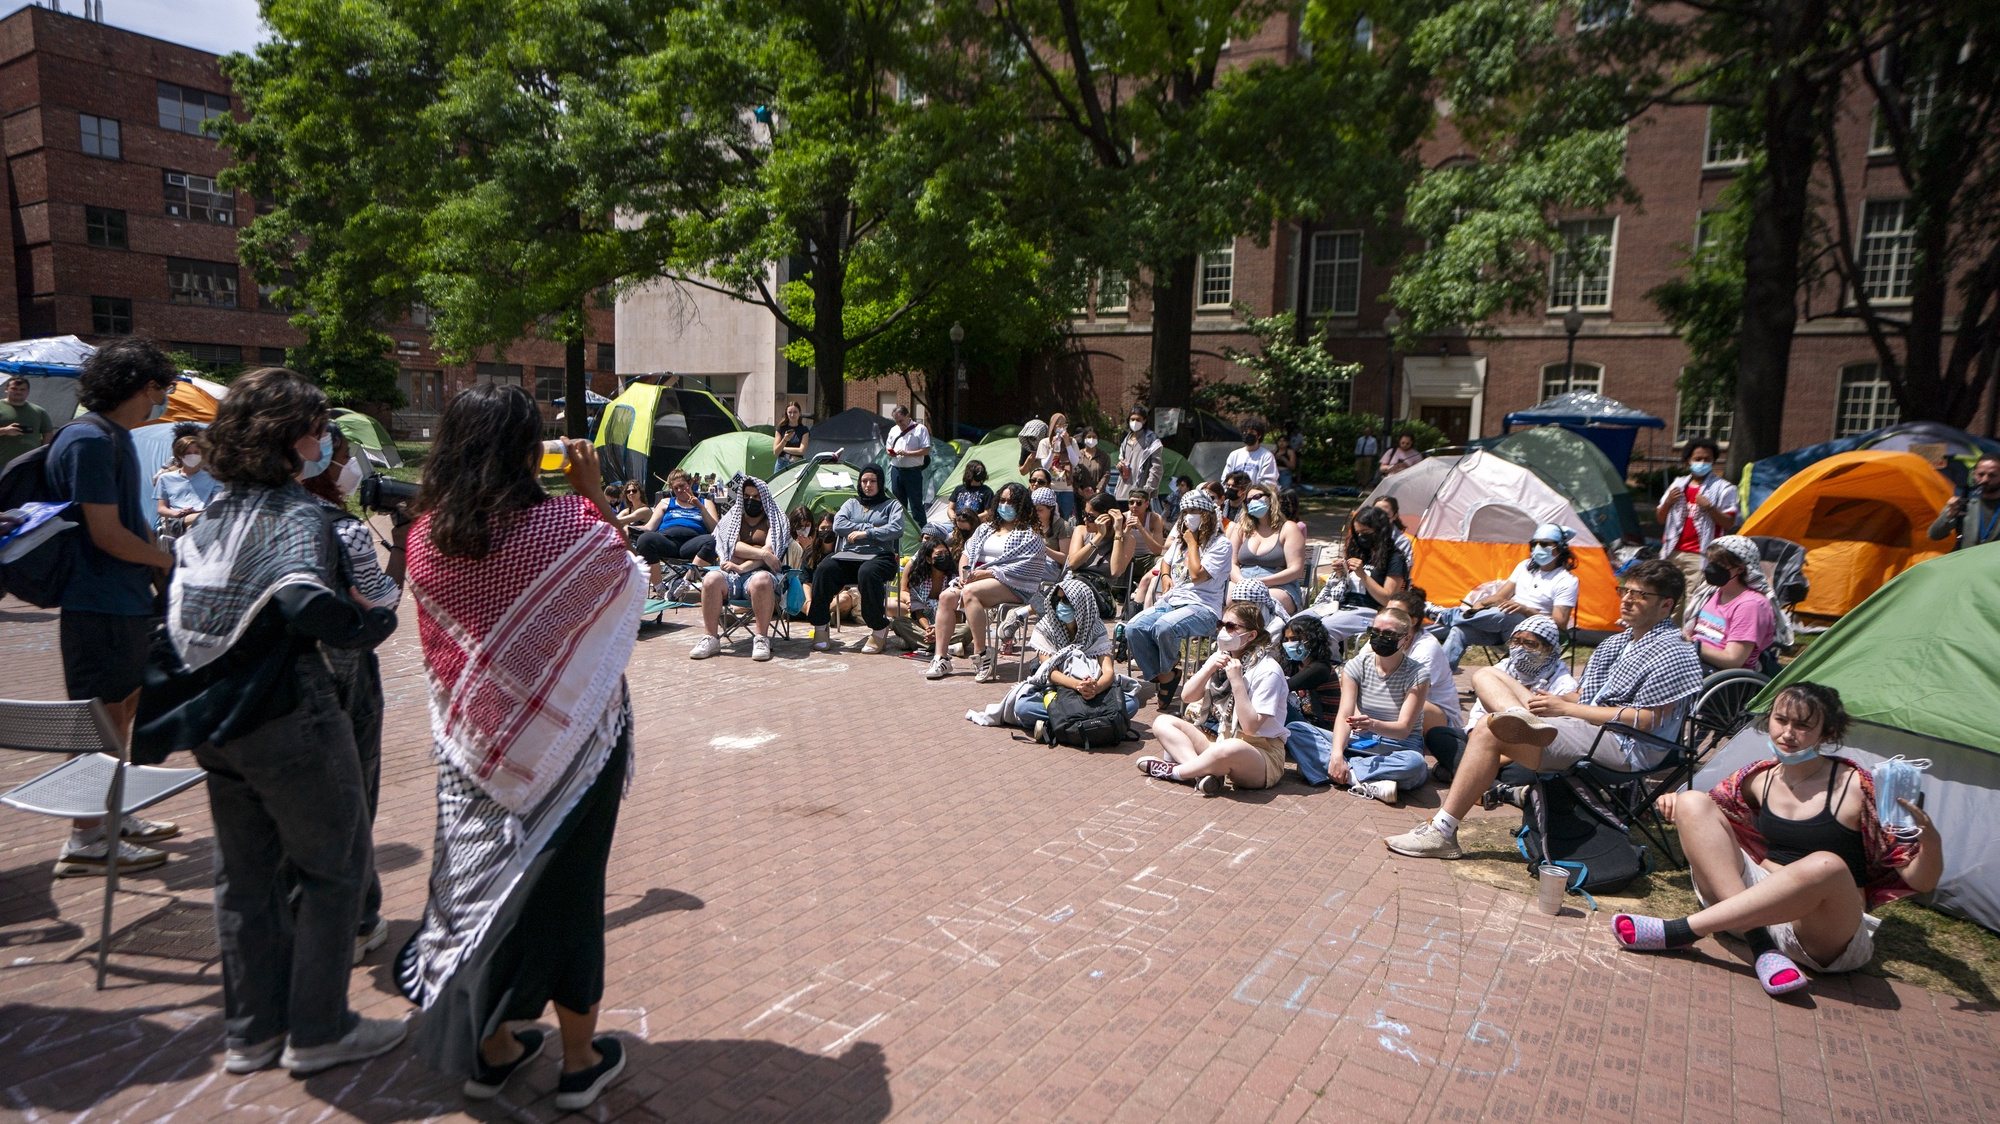 epa11316746 Activists participate in a community meeting at the ongoing encampment of pro-Palestinian protesters in the University Yard at George Washington University (GWU) in Washington, DC, USA, 03 May 2024. Nationwide protests have sprung up across the country on school campuses, many calling for institutions to divest investments in Israel and in support of a ceasefire in the Gaza conflict.  EPA/SHAWN THEW